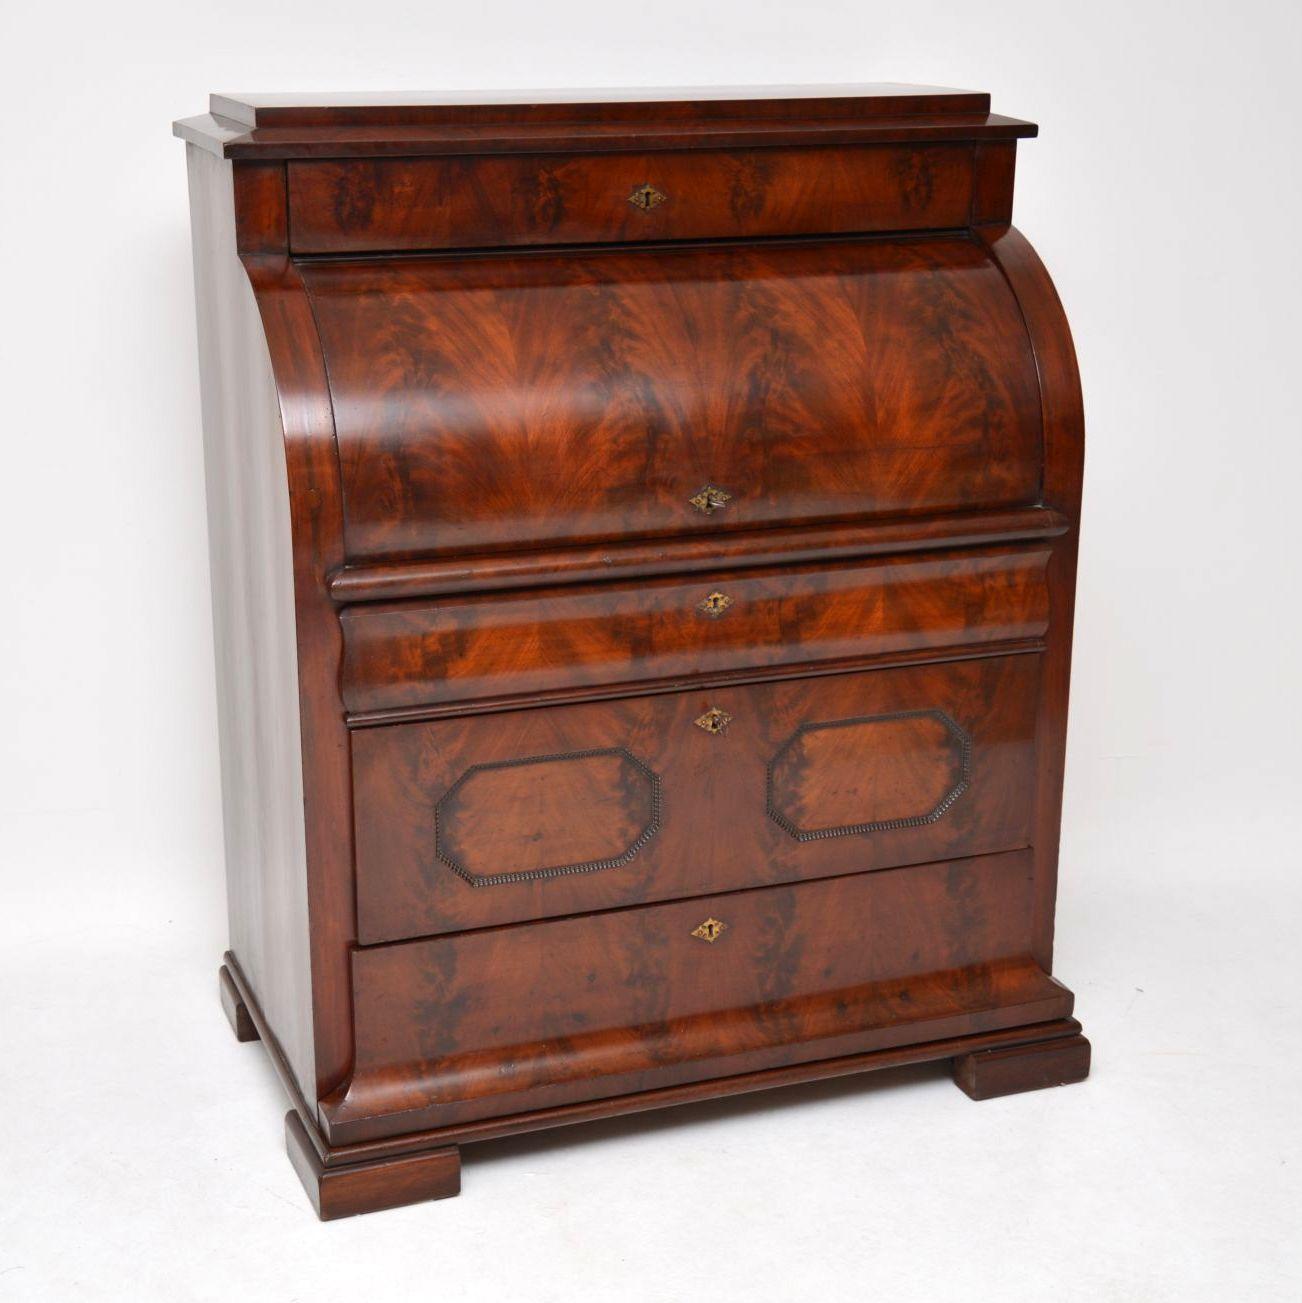 This antique mahogany cylinder top bureau is a spectacular piece of furniture and is in excellent condition. I believe it’s French and dates from around the 1840s period. Please enlarge all the images to see all the many fine details and see how the